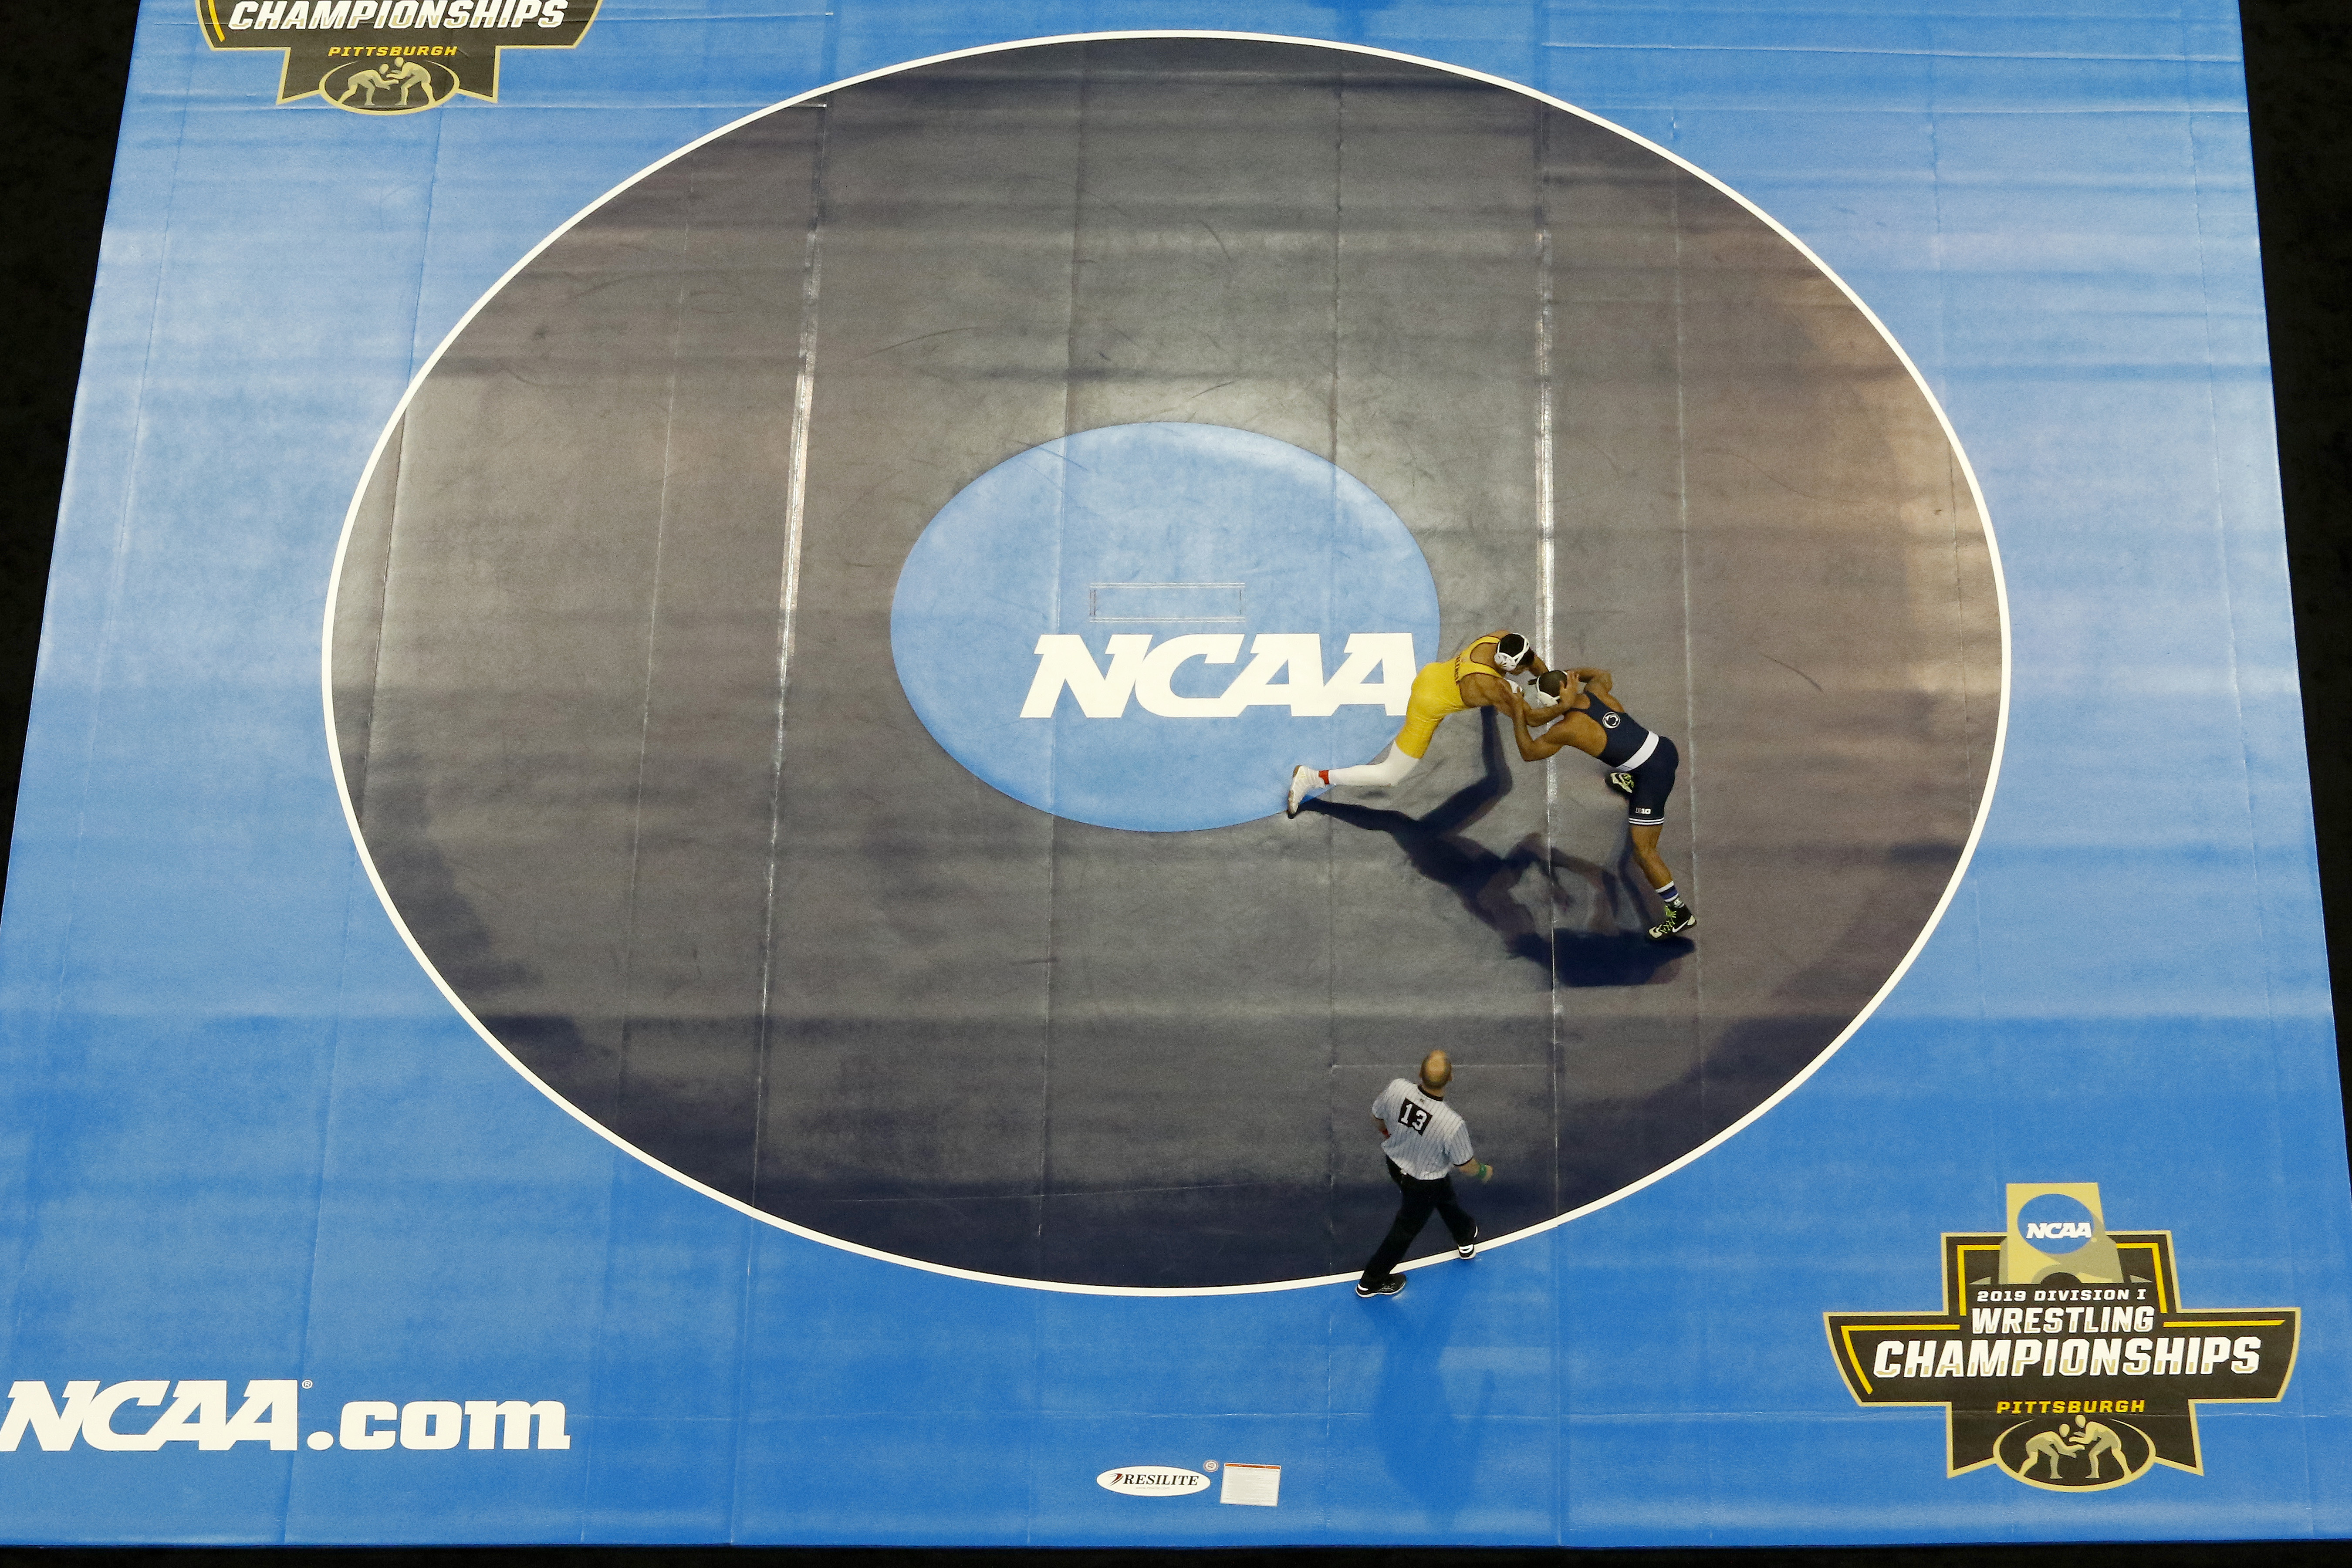 NCAA wrestling championship tournament 2021 free live stream info, schedule, TV channels, how to watch online